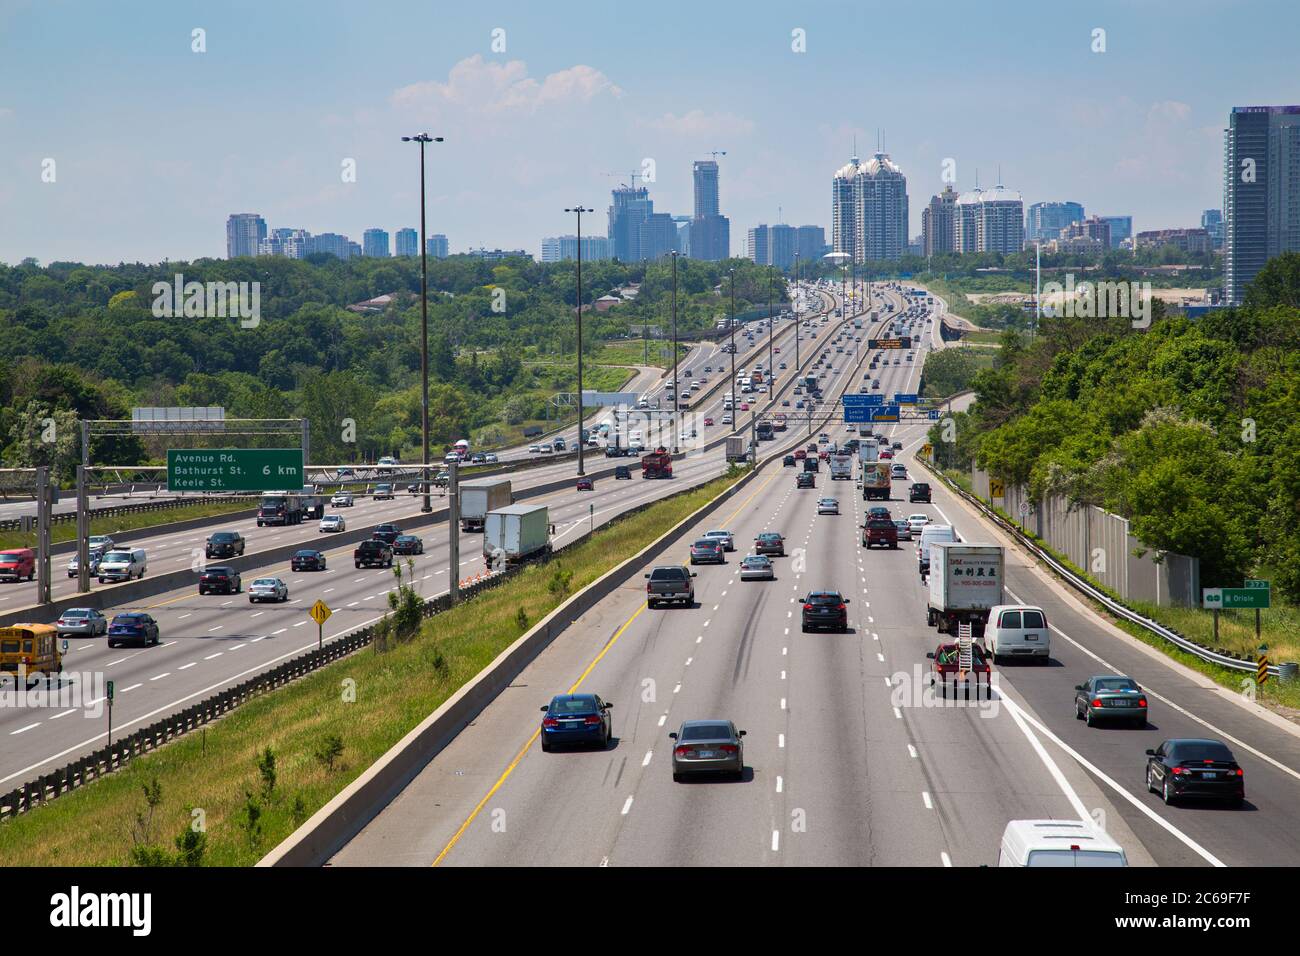 TORONTO, CANADA - JUNE 16, 2014: High view of part of Highway 401 running through Toronto during the day with lots of traffic. Stock Photo